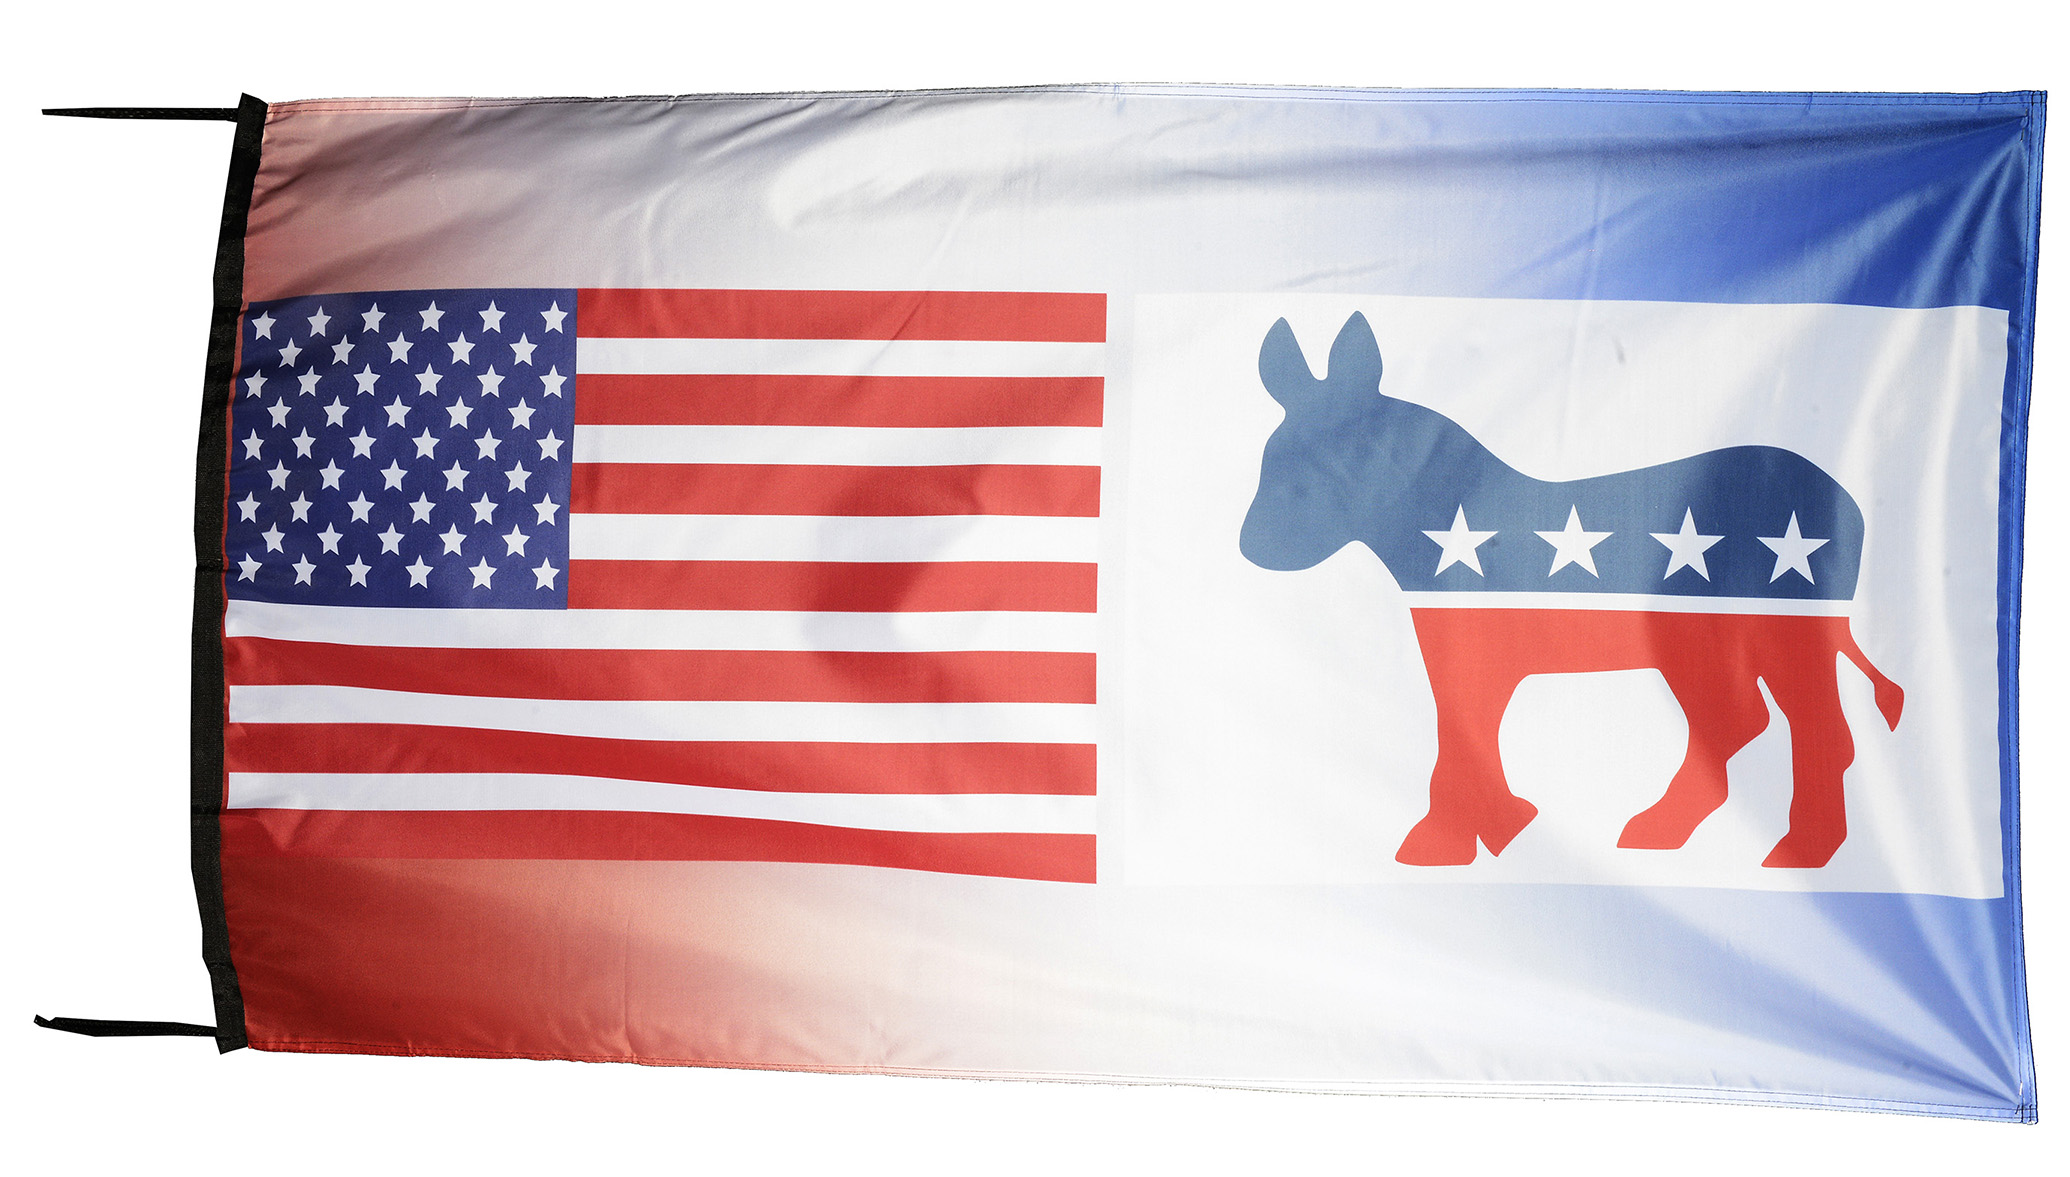 Flag  080 USA / US Country / United States Of America and European Union / Europe / Pride Hybrid Weather-Resistant Polyester Outdoor Flag Landscape Banner / Vivid Colors / 3 X 5 FT (150 x 90cm) International Flags for Sale